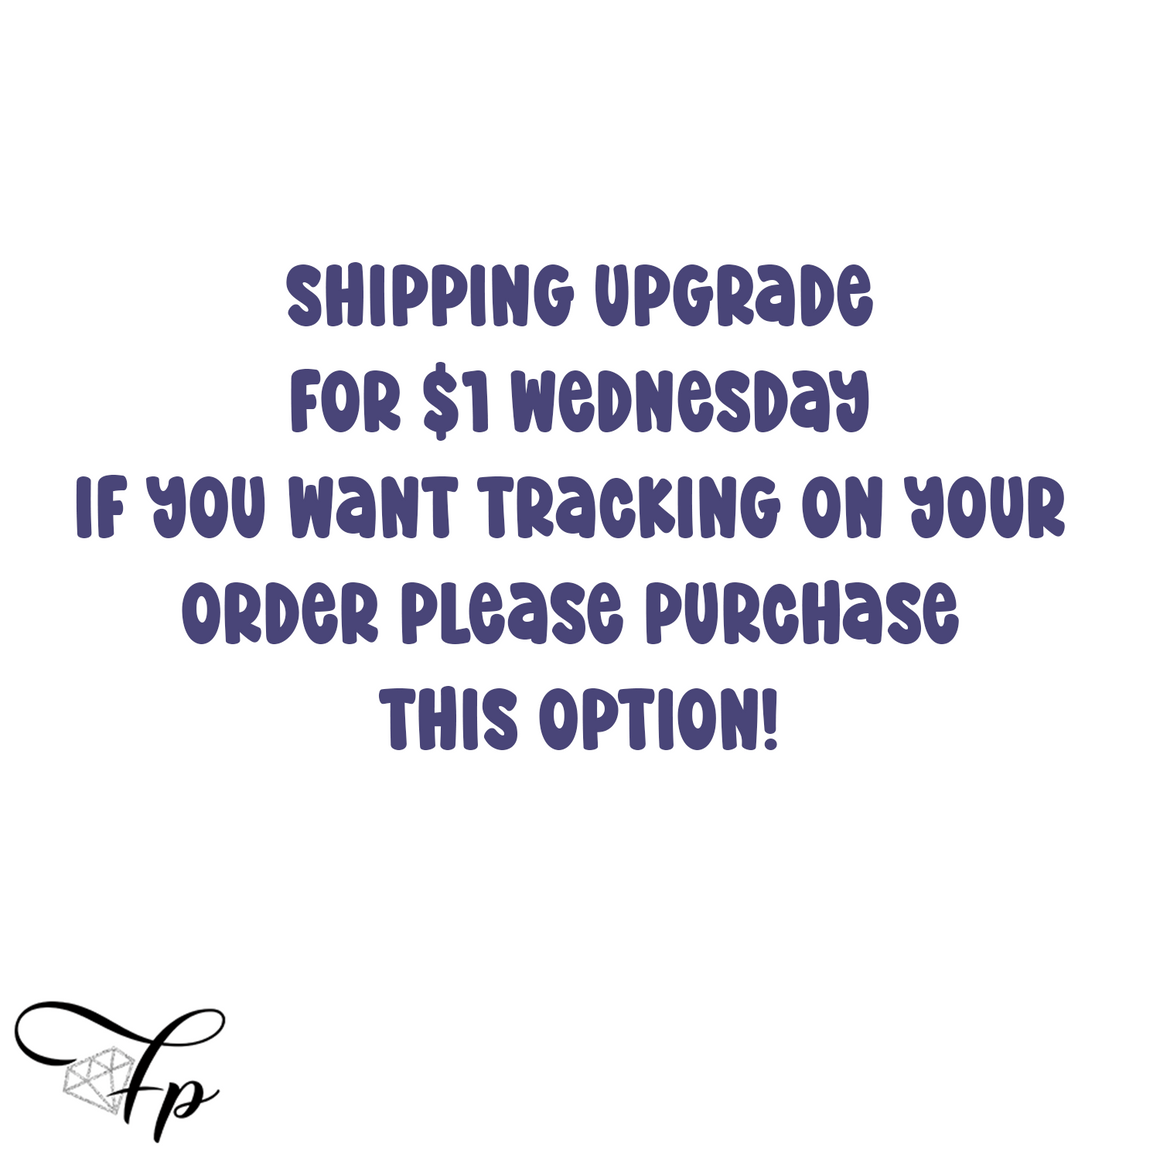 $1 Wednesday Shipping Upgrade with Tracking